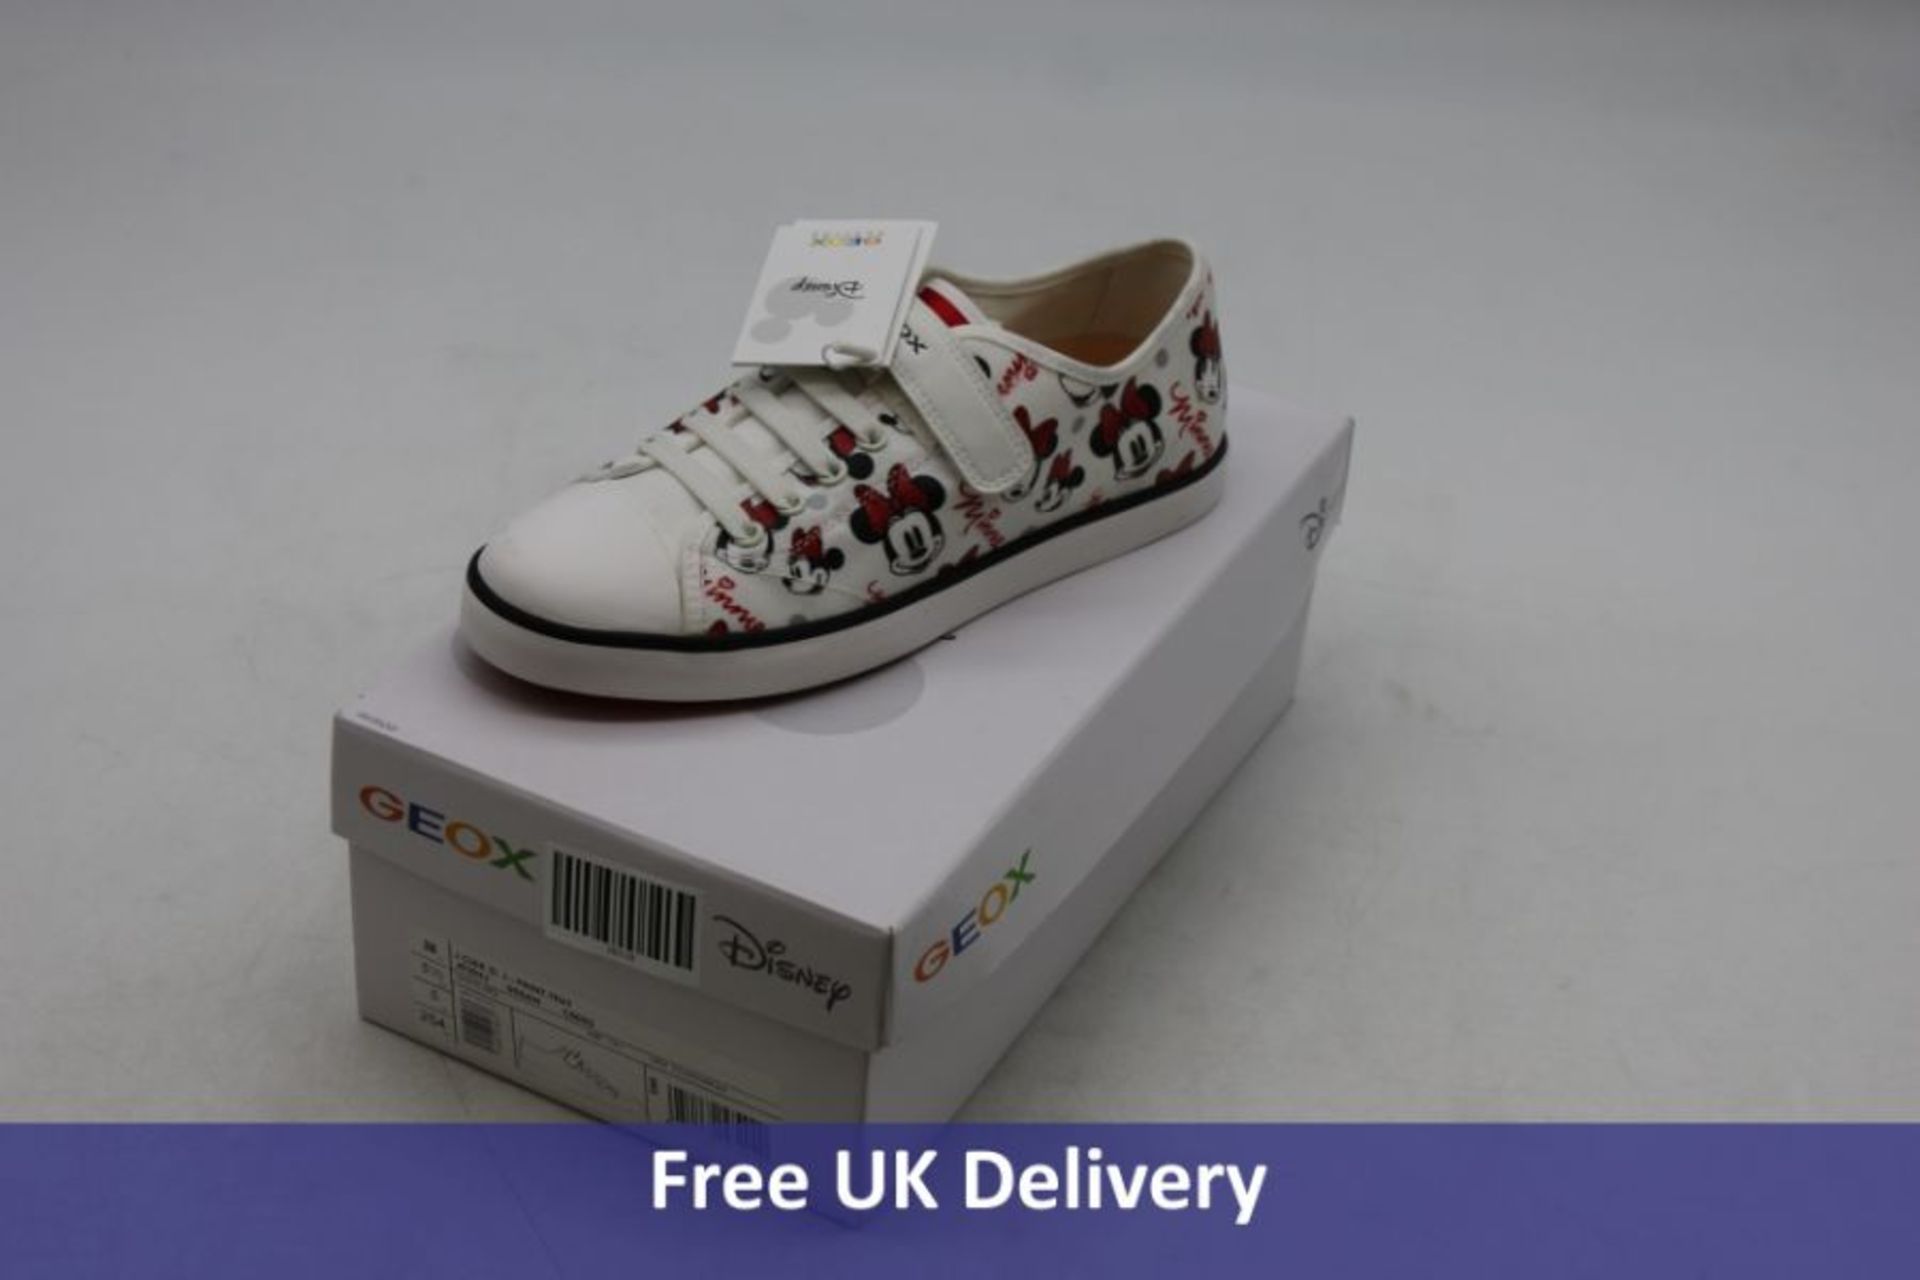 Two Geox Children's Footwear to include 1x Disnep Ciak Children's Sneakers, White/Red, UK 5 and 1x G